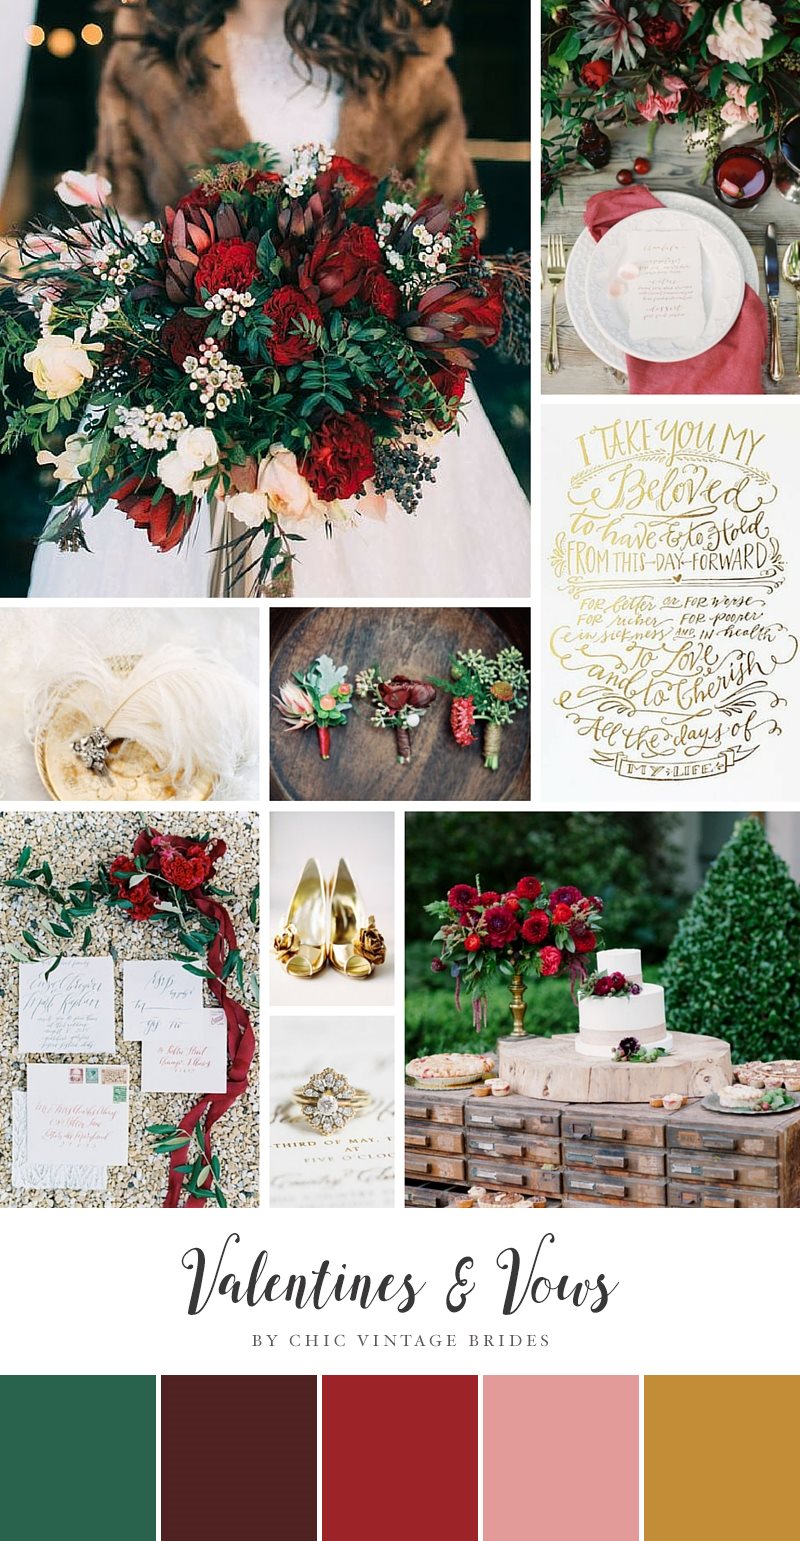 Valentines & Vows - Valentines Day Wedding Ideas in a Romantic Palette of Red & Gold